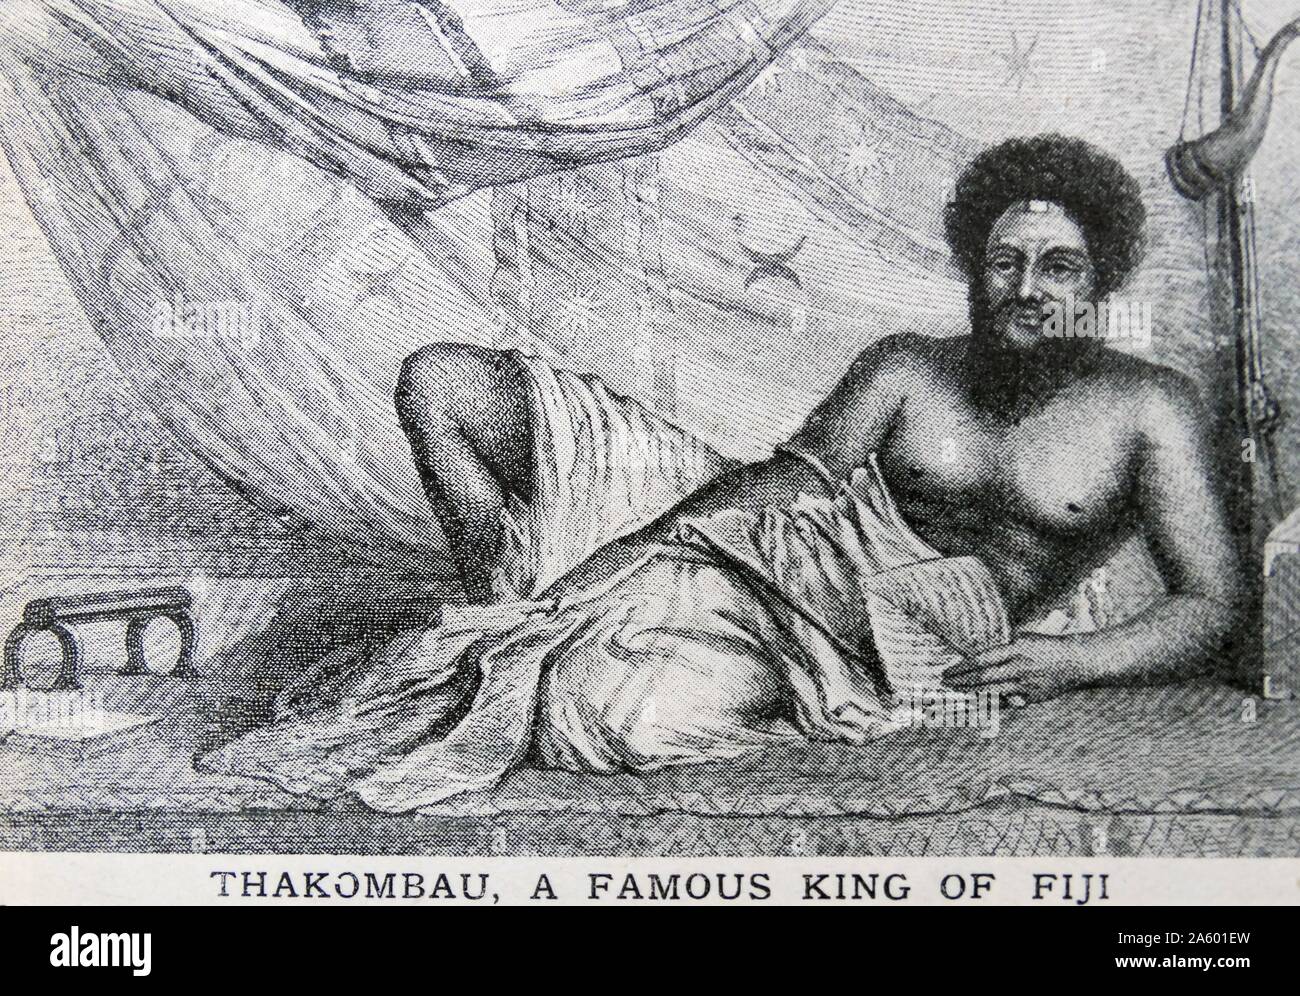 Thakombau, a famous King of Fiji. He ruled over the greater part of the Fiji Islands from 1852 to 1883. The islands reached their greatest prosperity under him and he voluntarily ceded his country to the British Government in the year 1871. Stock Photo